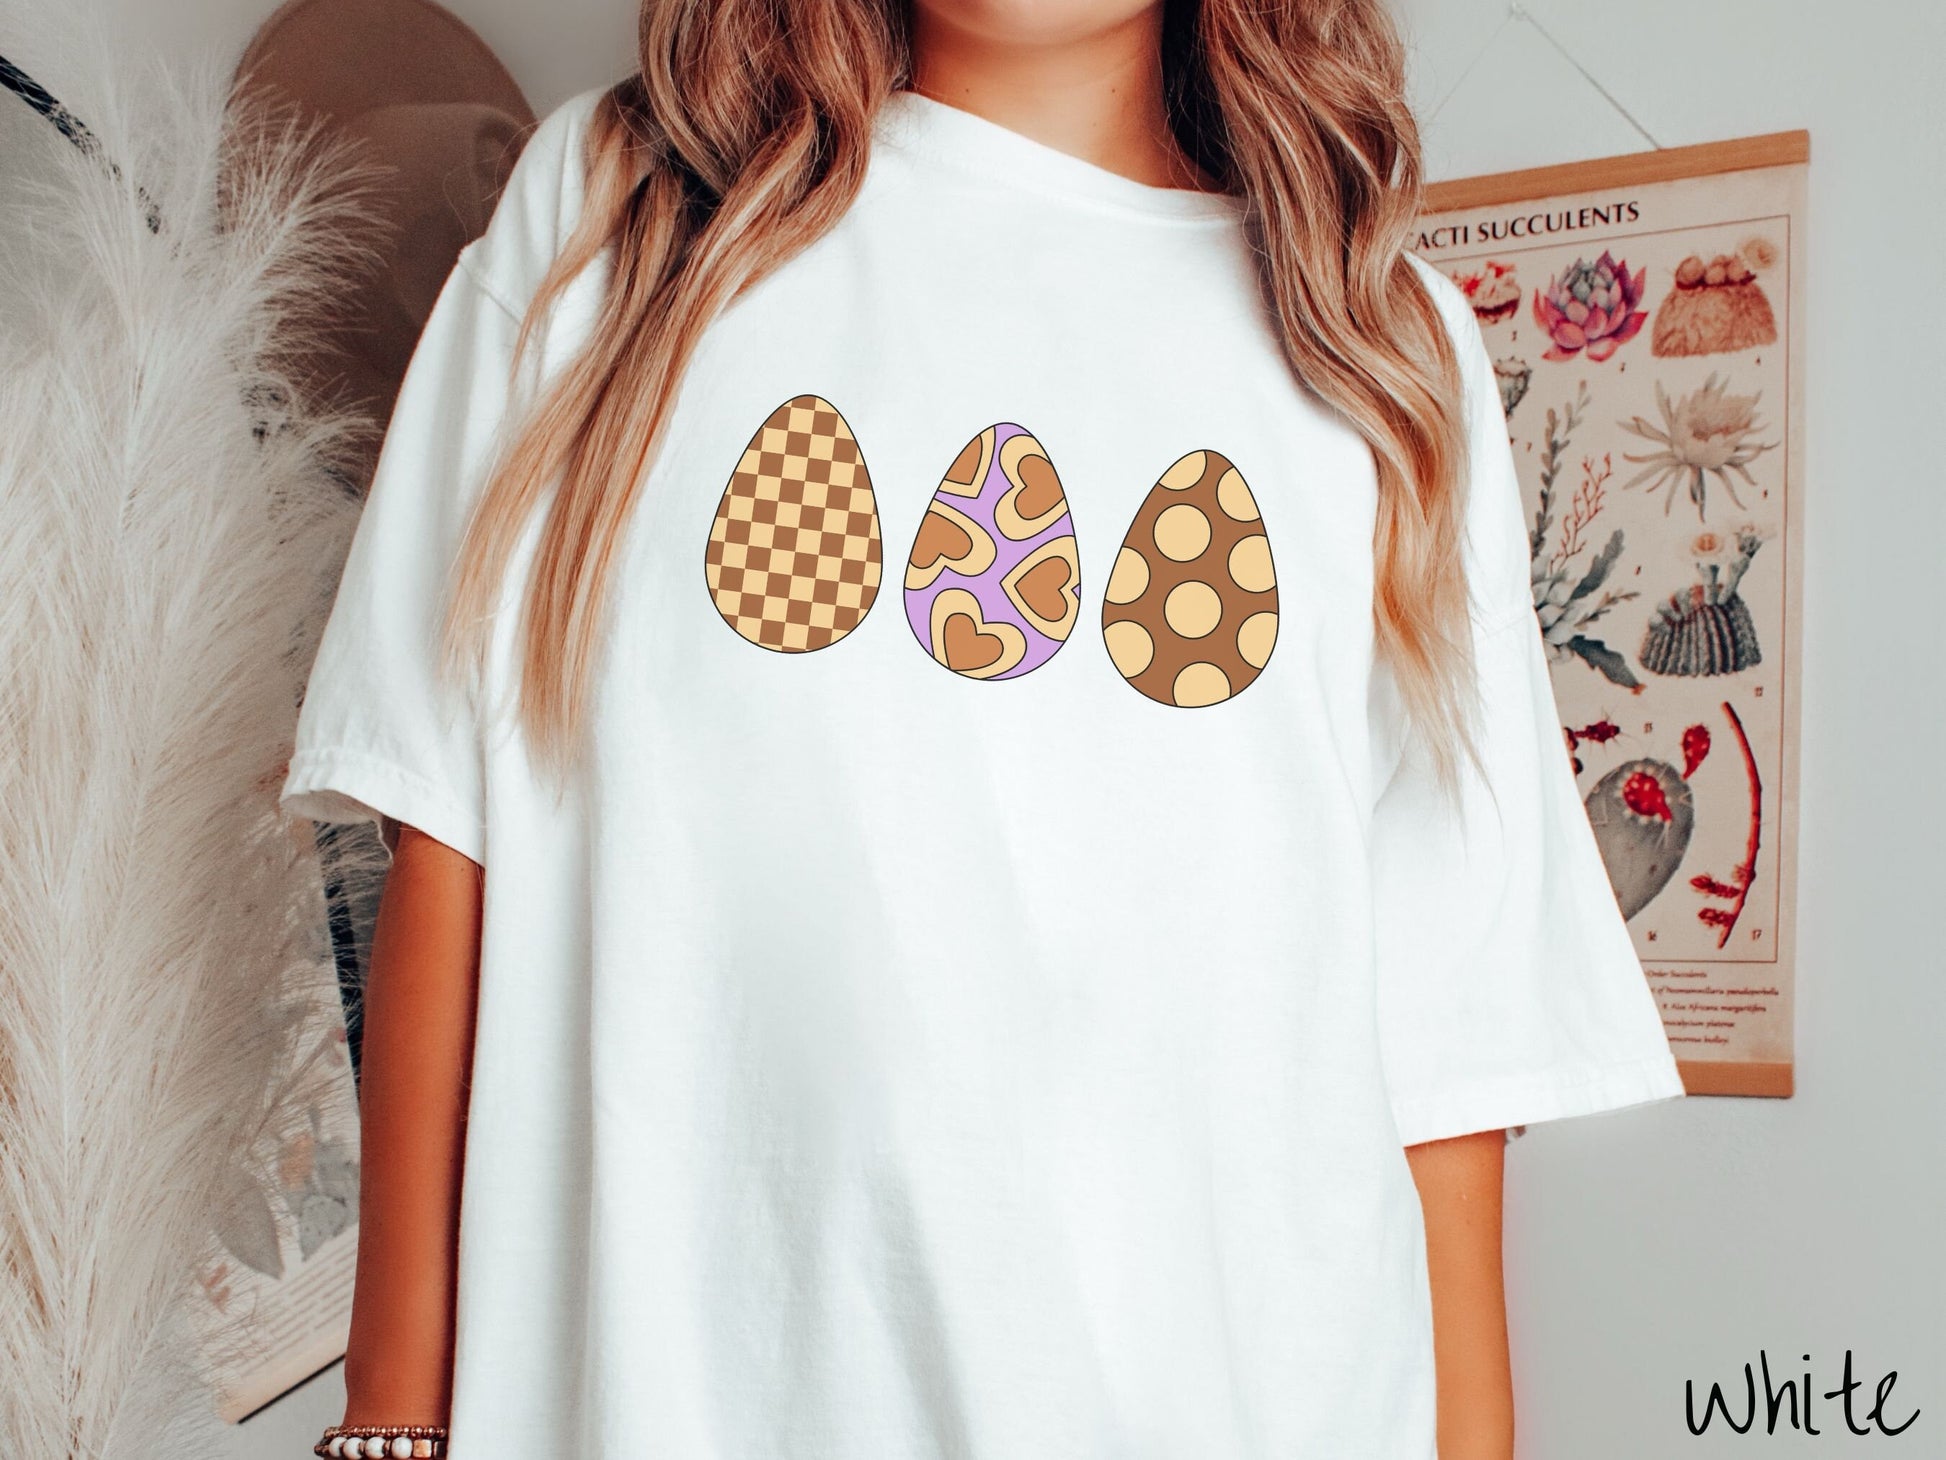 A woman wearing a cute, vintage white colored shirt with three Easter eggs. The left egg has a light yellow and brown checkerboard pattern, the middle is purple with light yellow brown hearts, and the right is brown with light yellow circles.